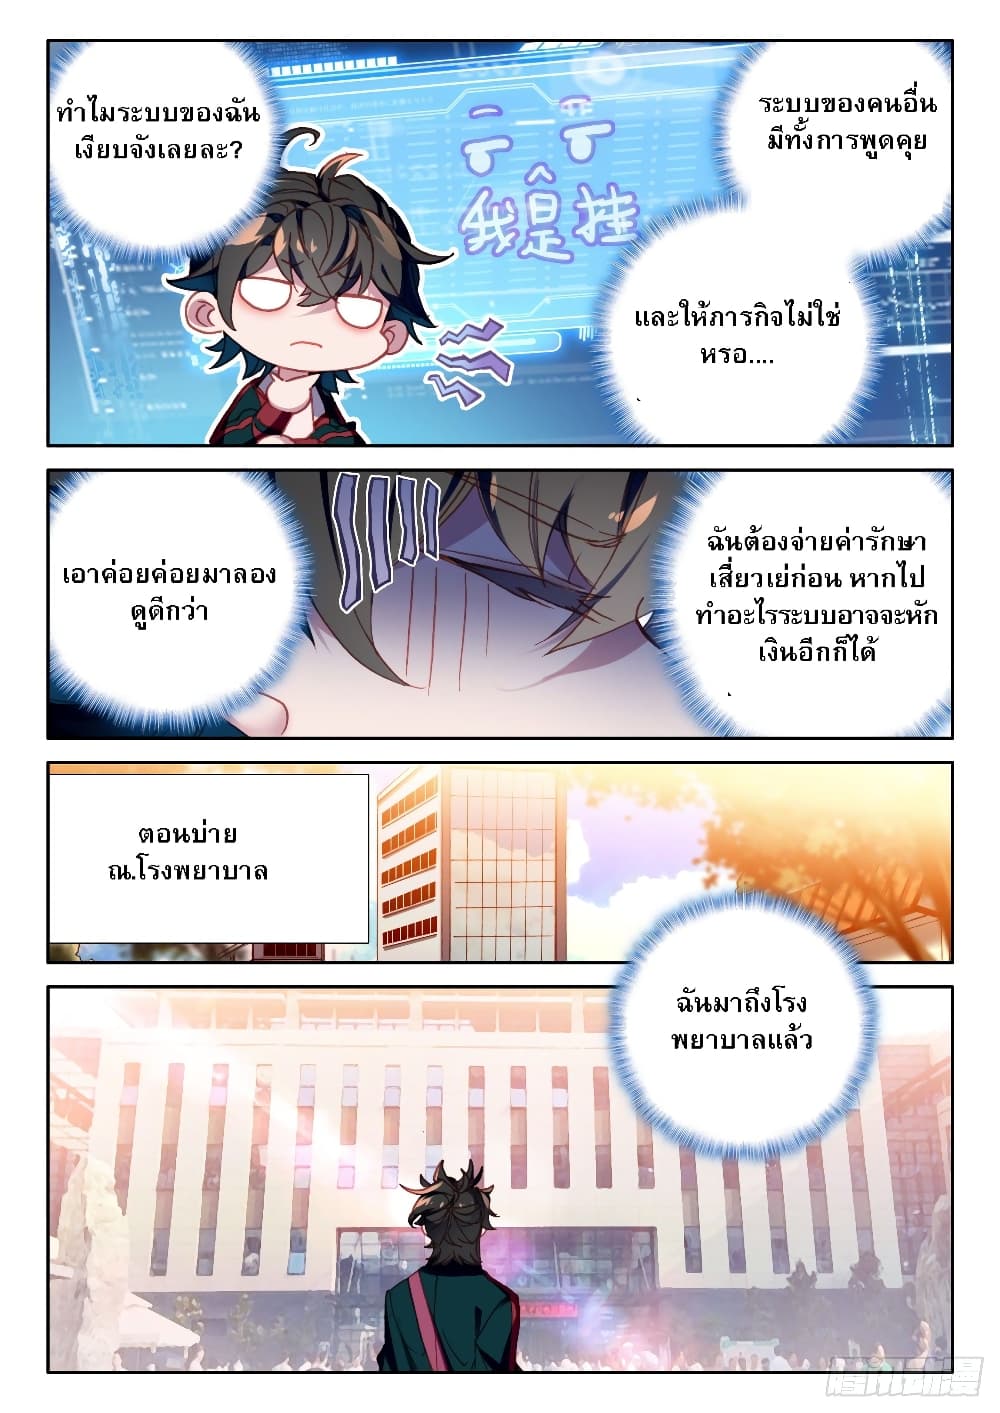 Becoming Immortal by Paying Cash ตอนที่ 7 (12)